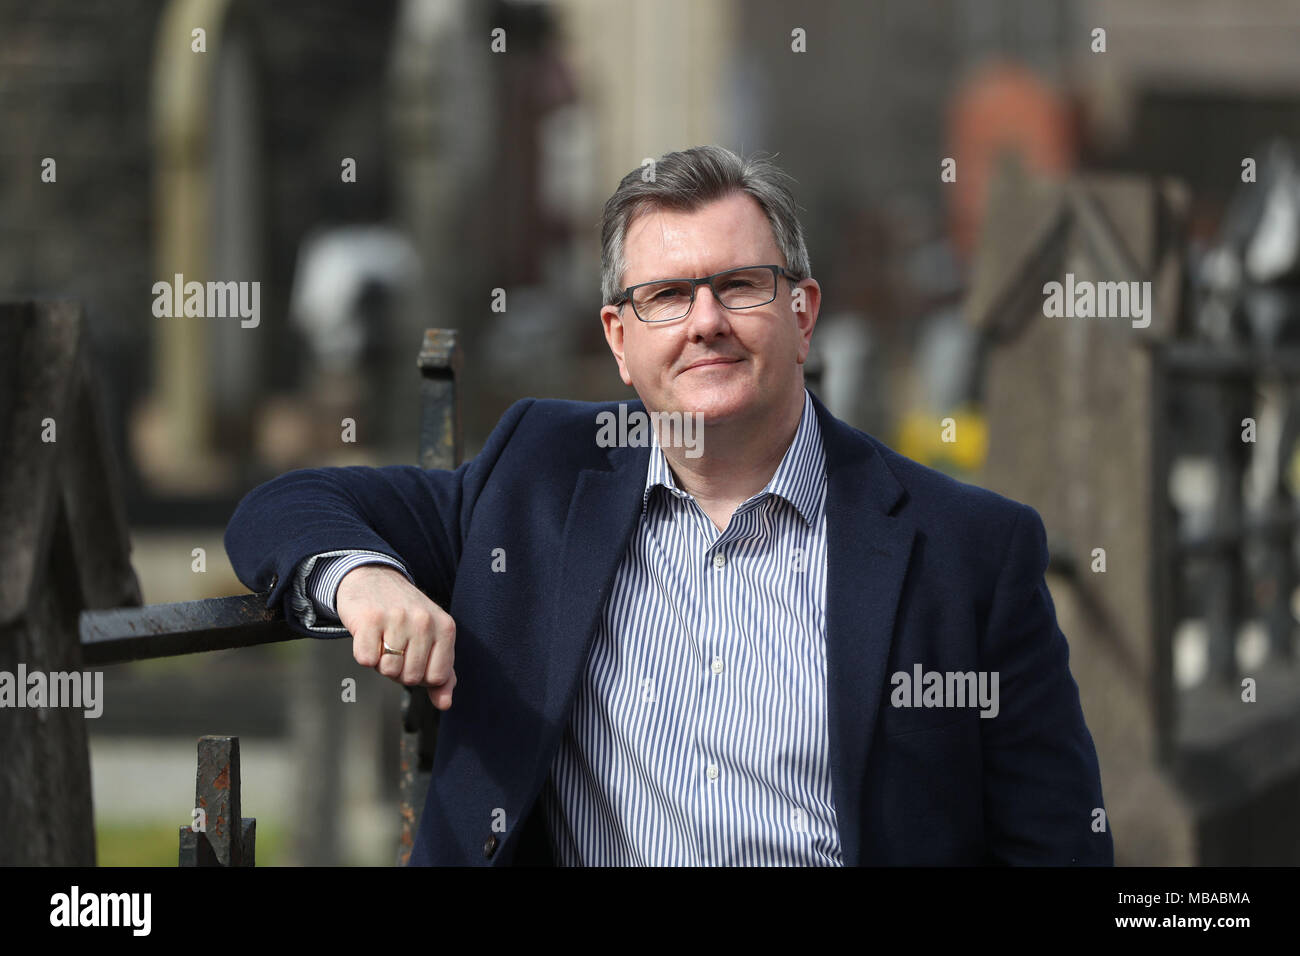 Lagan Valley DUP MP Sir Jeffrey Donaldson outside Dromore Cathedral in County Down, Northern Ireland. Stock Photo